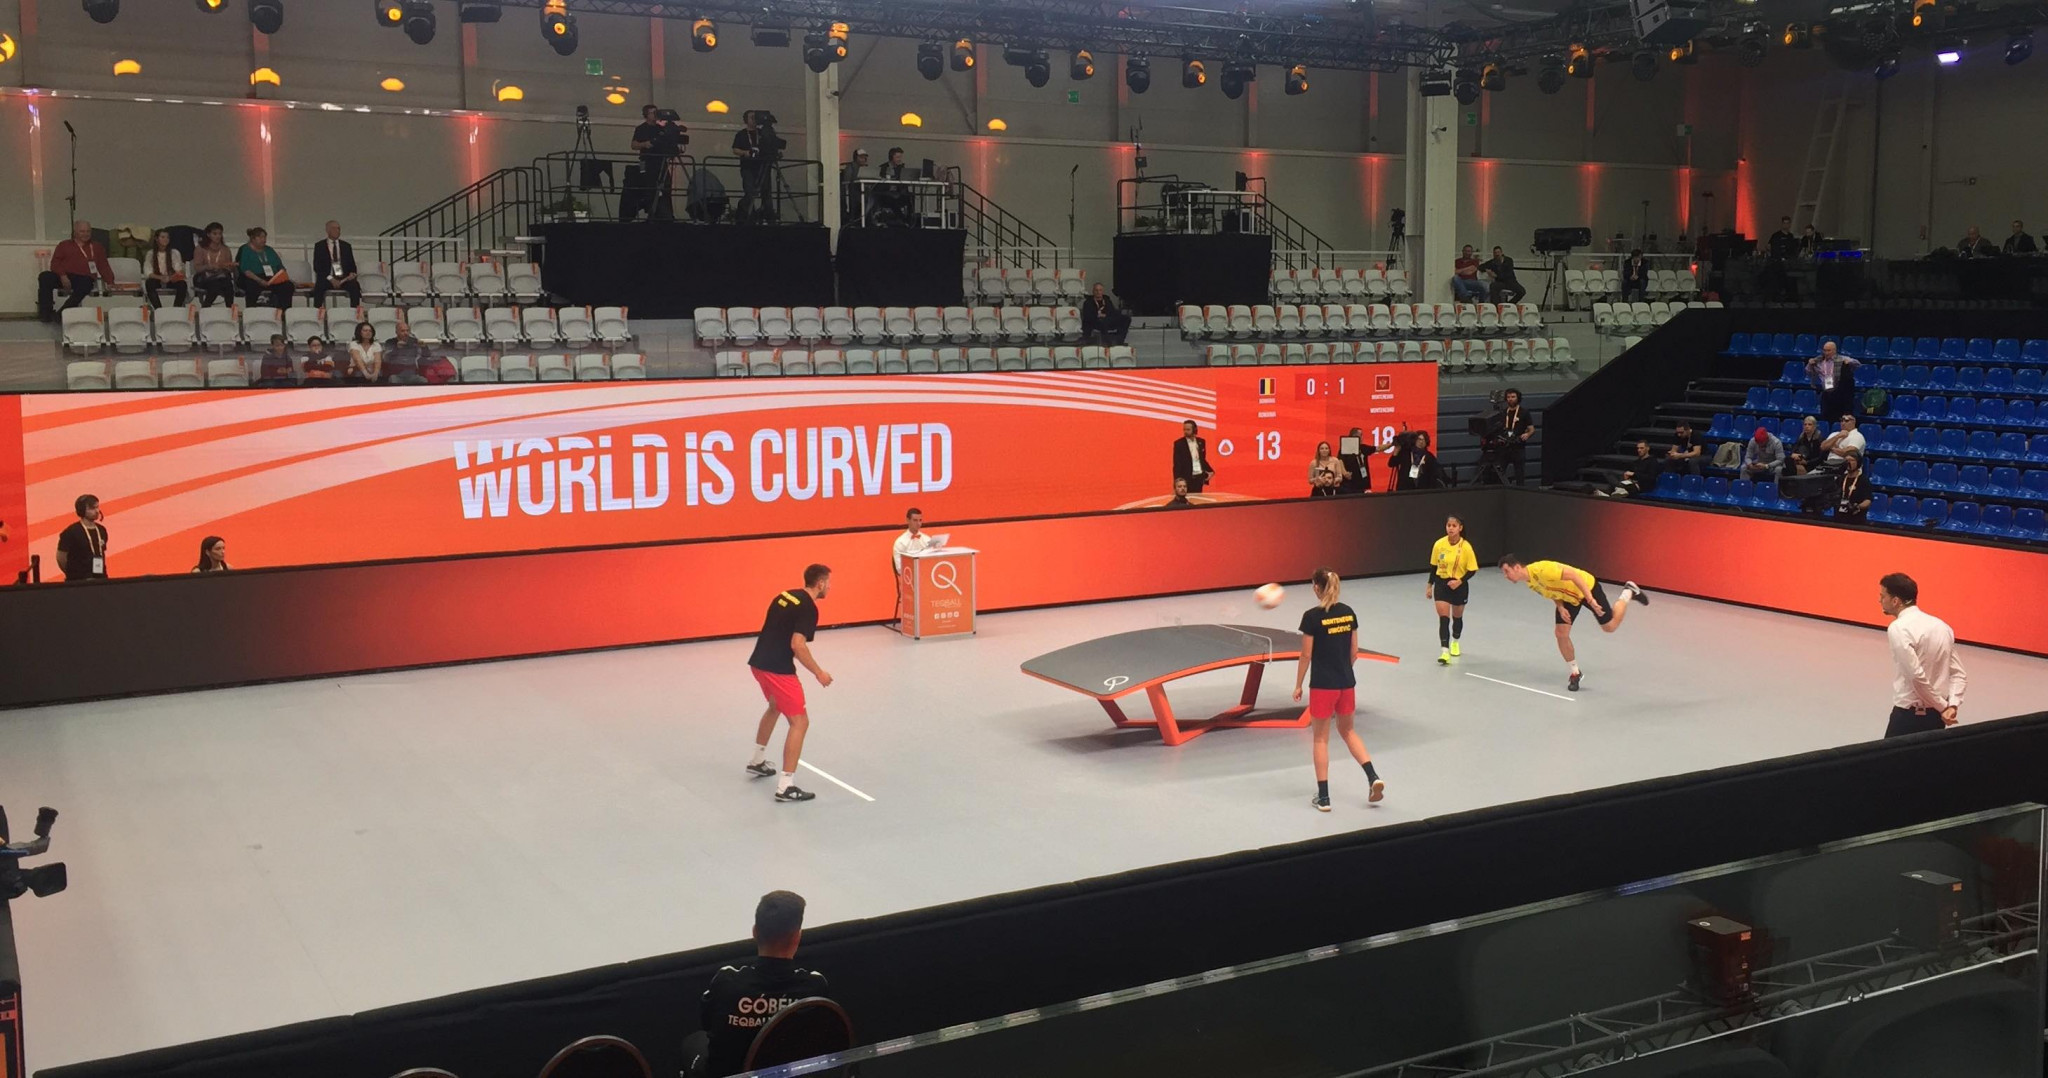 Women-only events will feature at the Teqball World Championships for the first time this year ©ITG